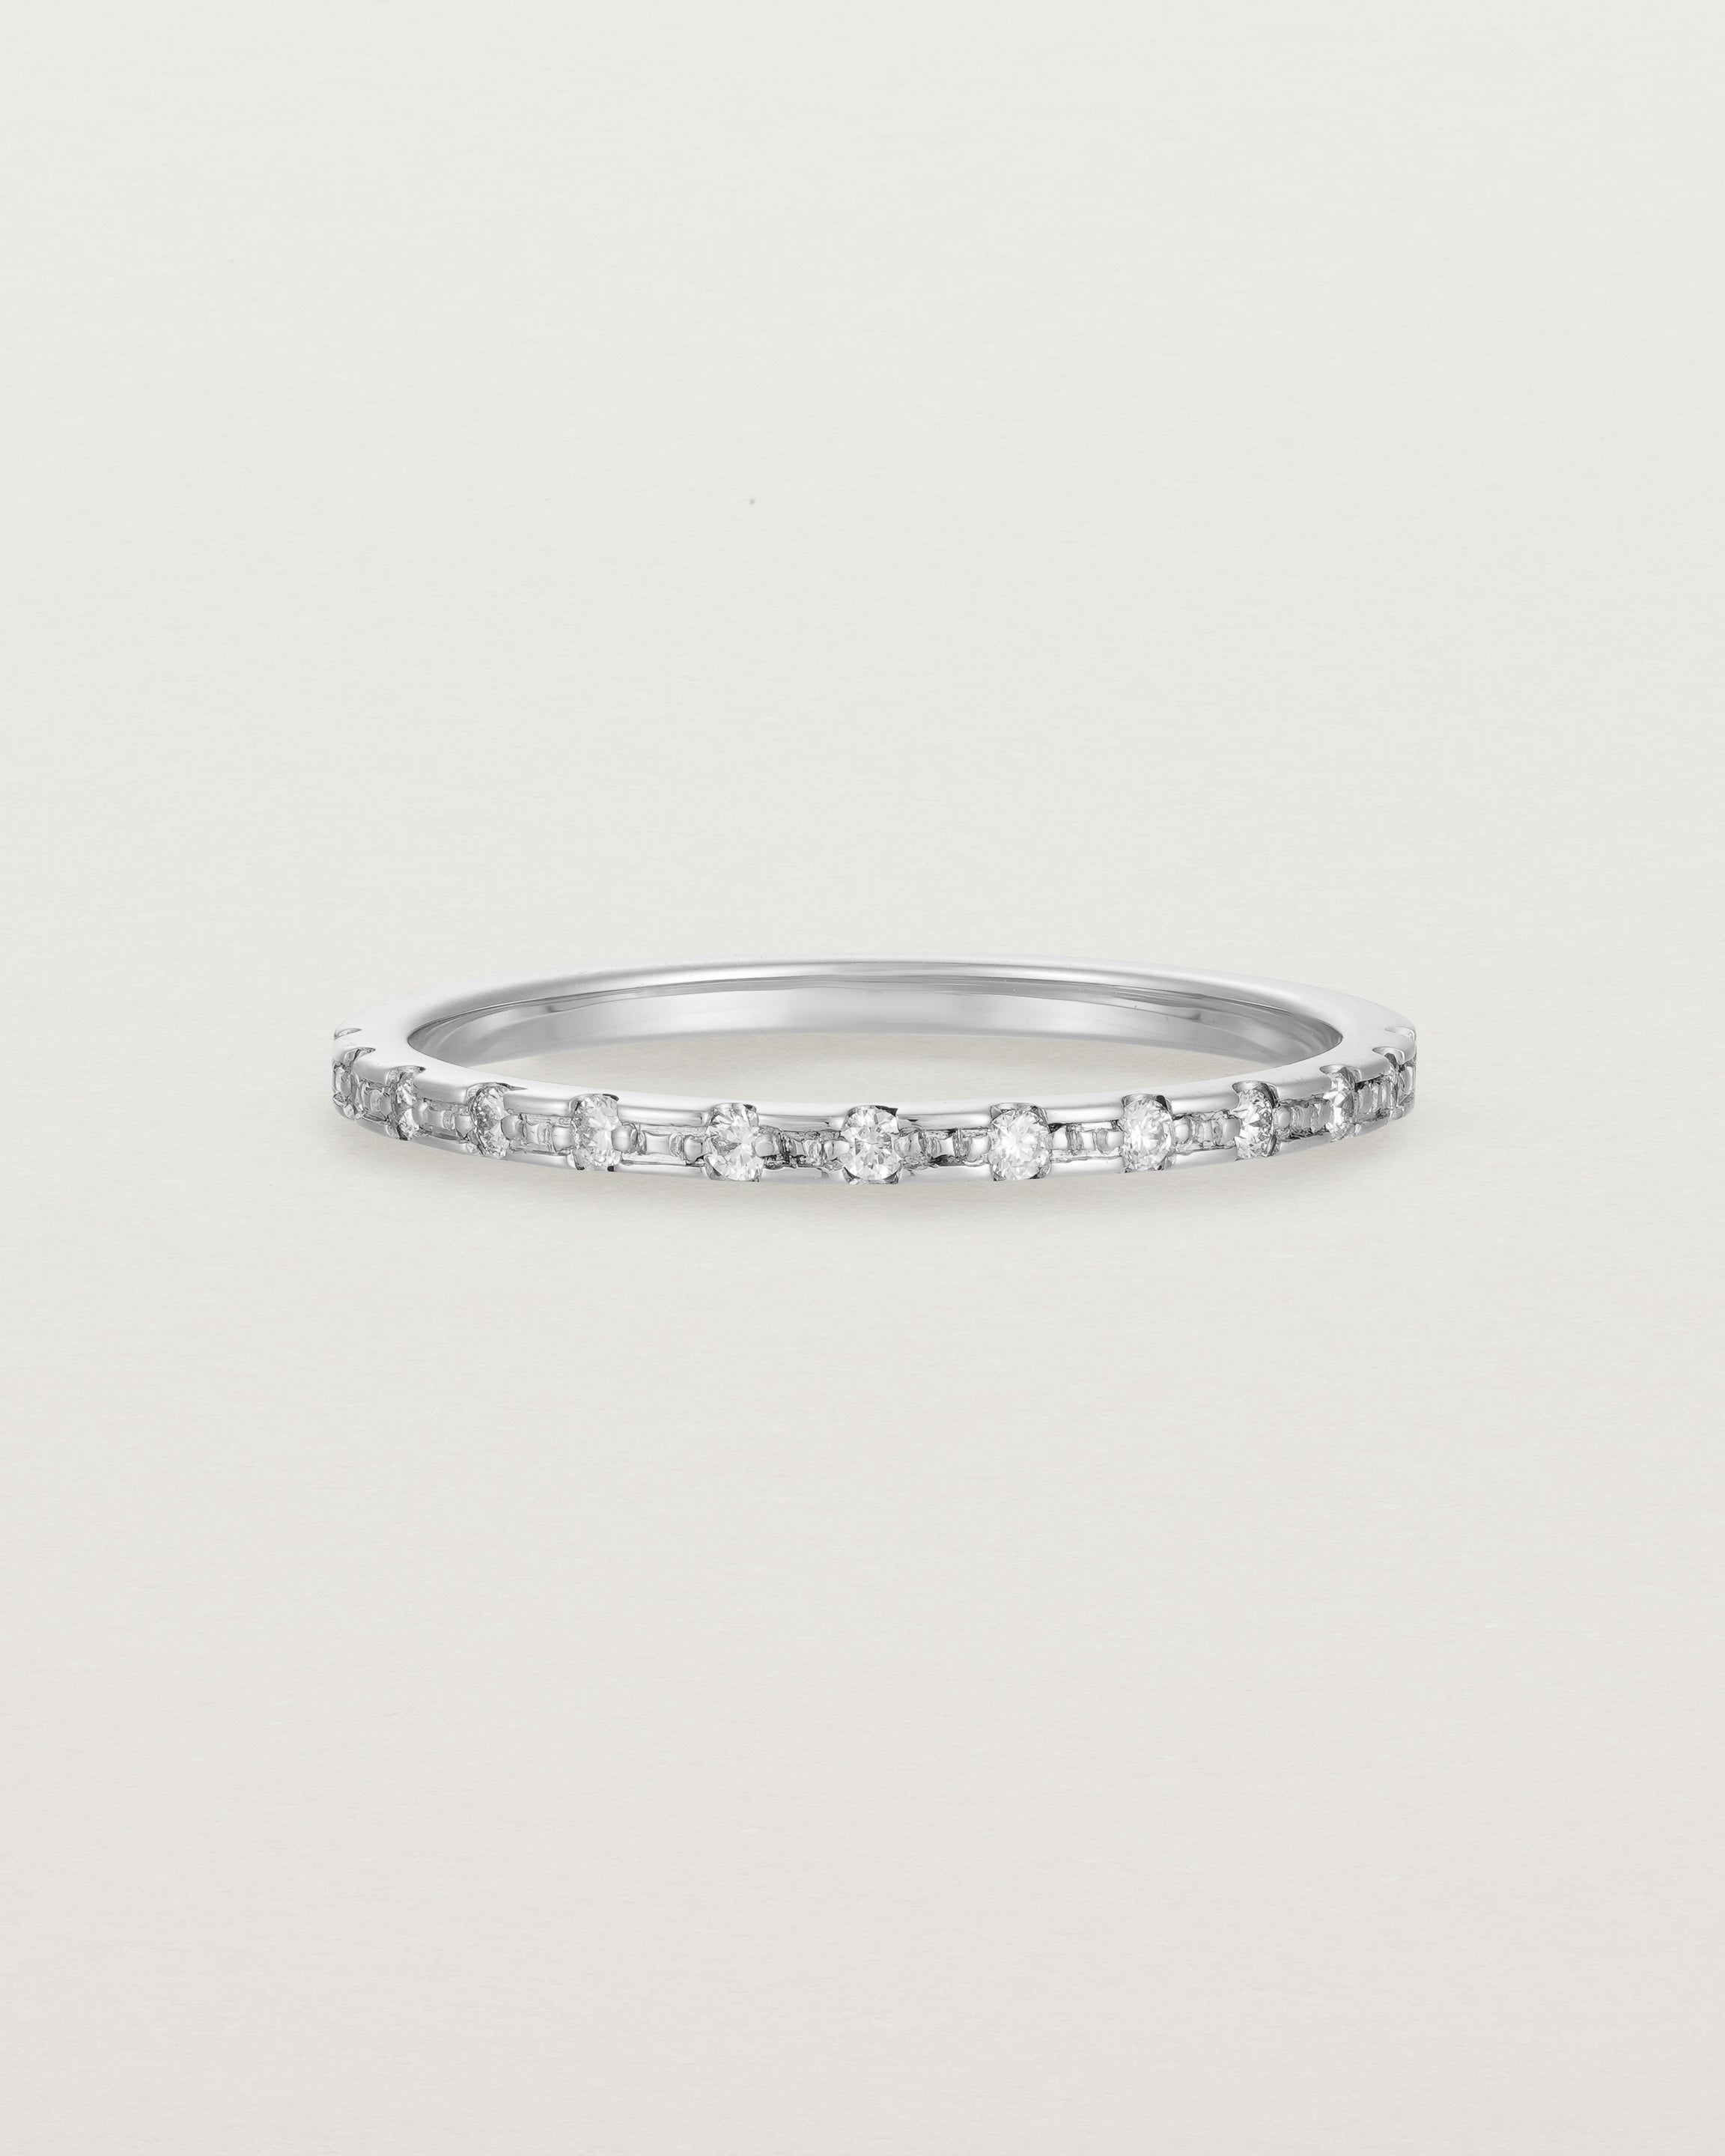 Front View of Cascade Square Profile Wedding Ring | Diamonds | White Gold 